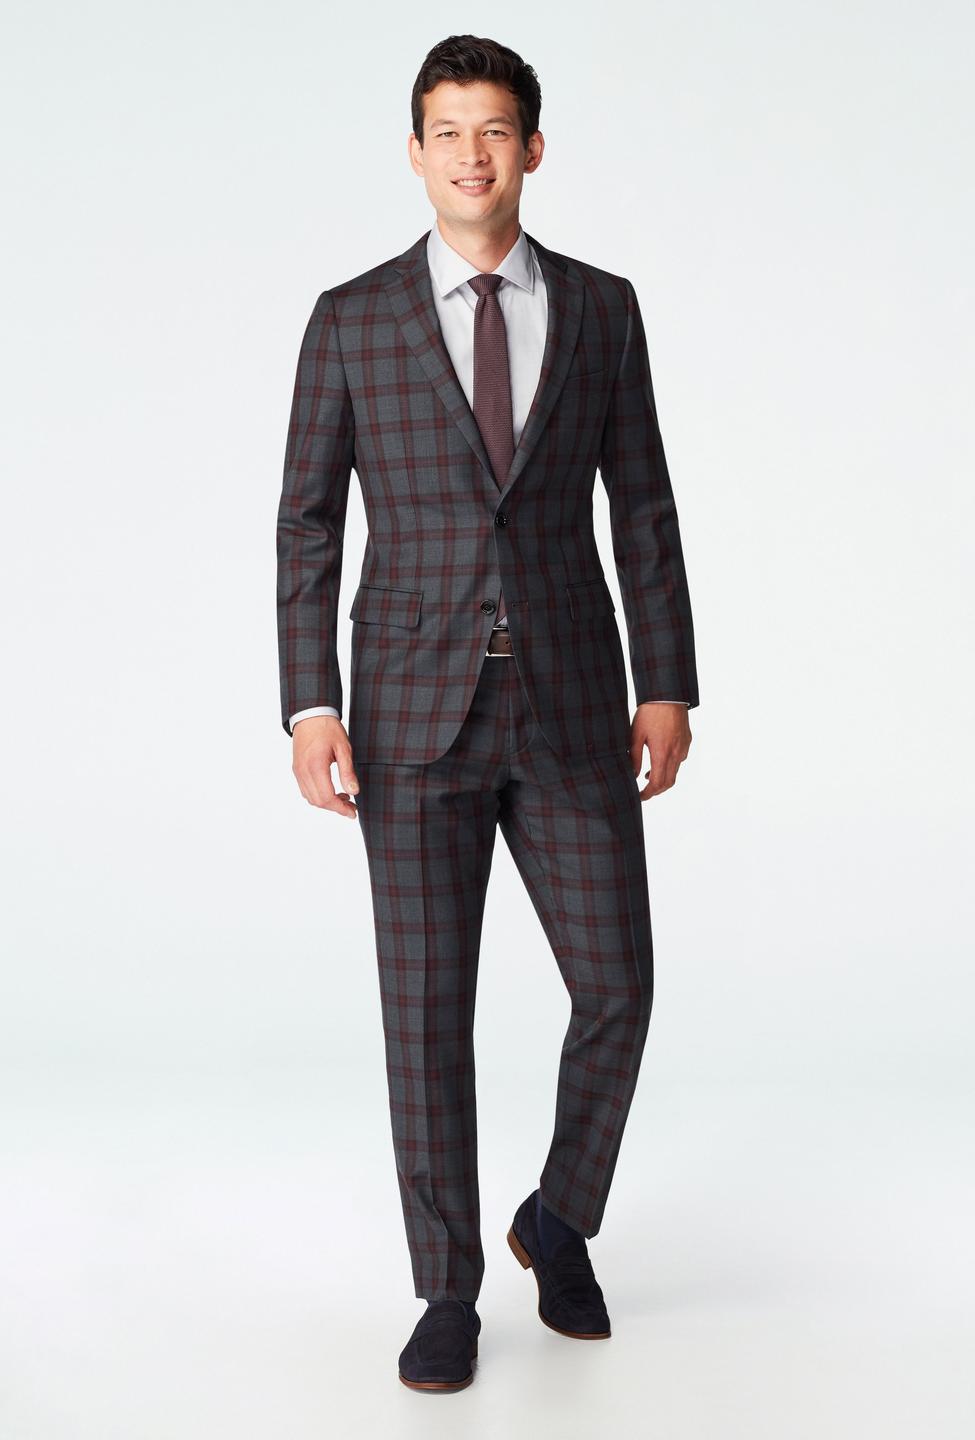 Gray suit - Dursley Plaid Design from Seasonal Indochino Collection